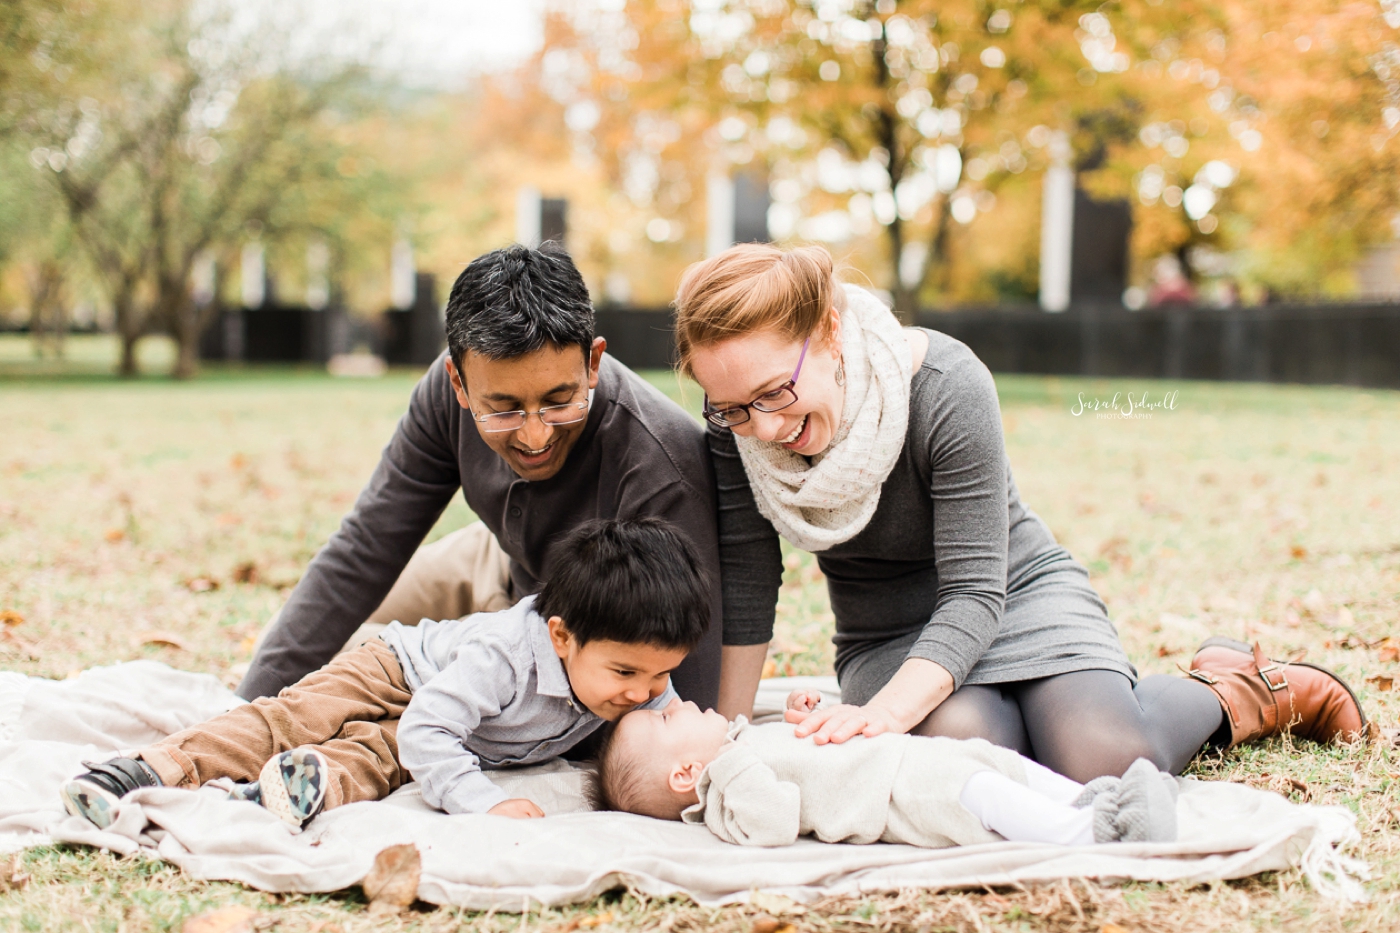 Family Session In The Park | Sarah Sidwell